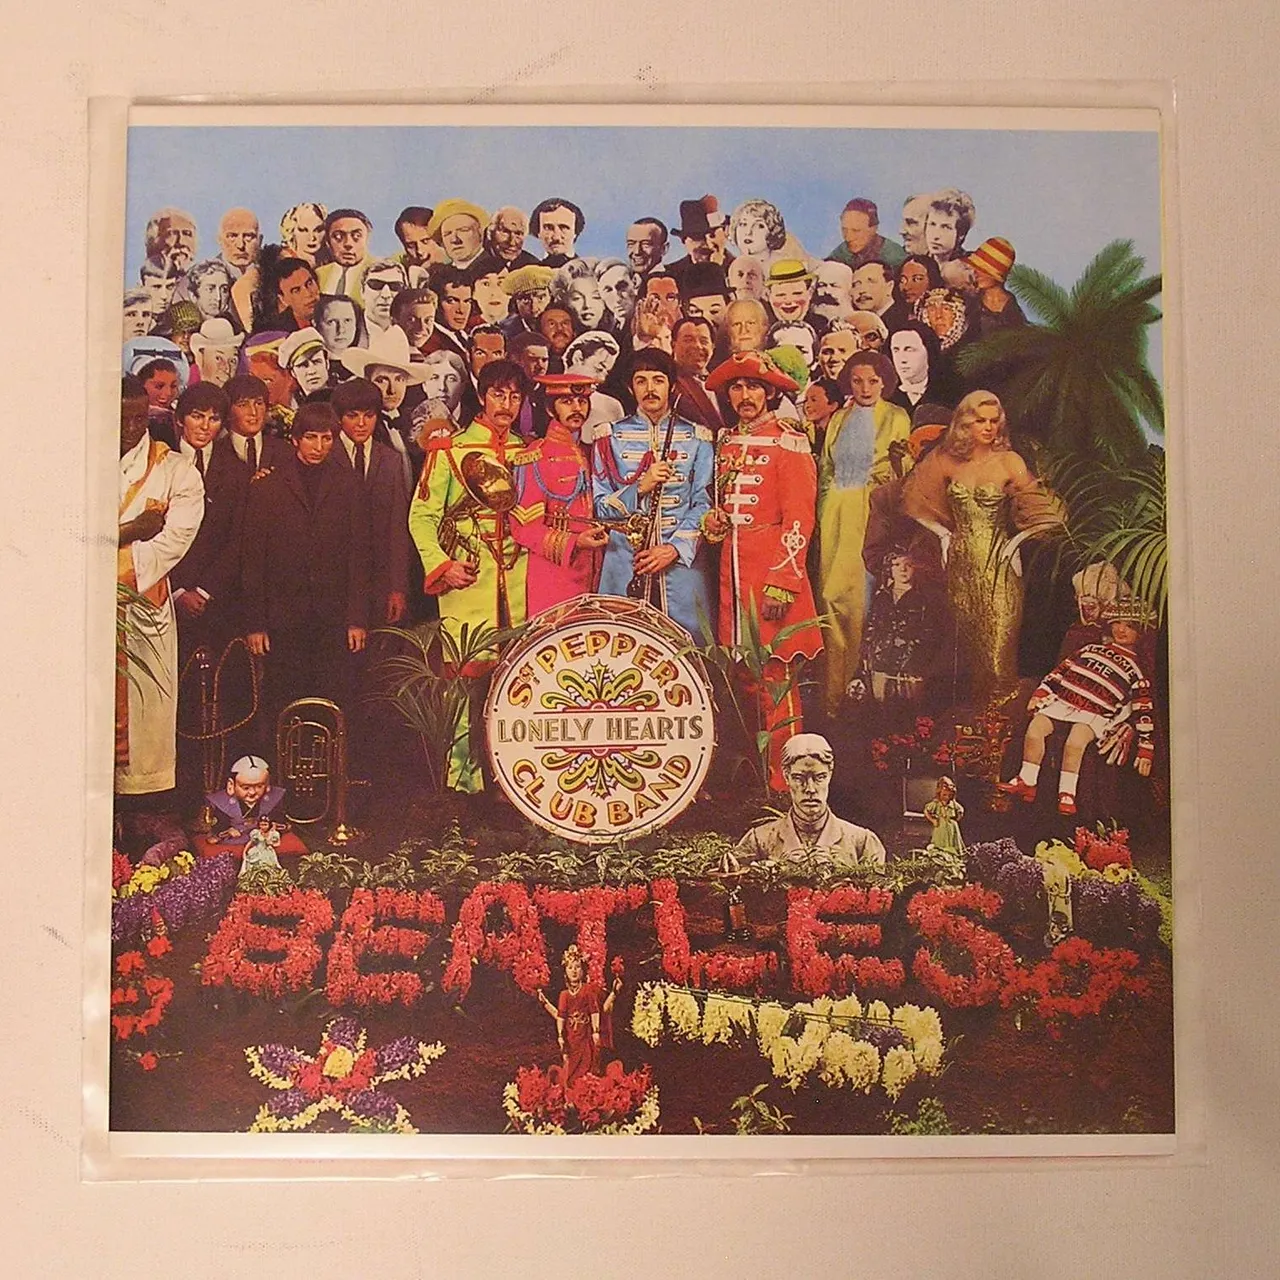 Sgt. Pepper's Lonely Hearts Club Band - Beatles, The (album) photo 1